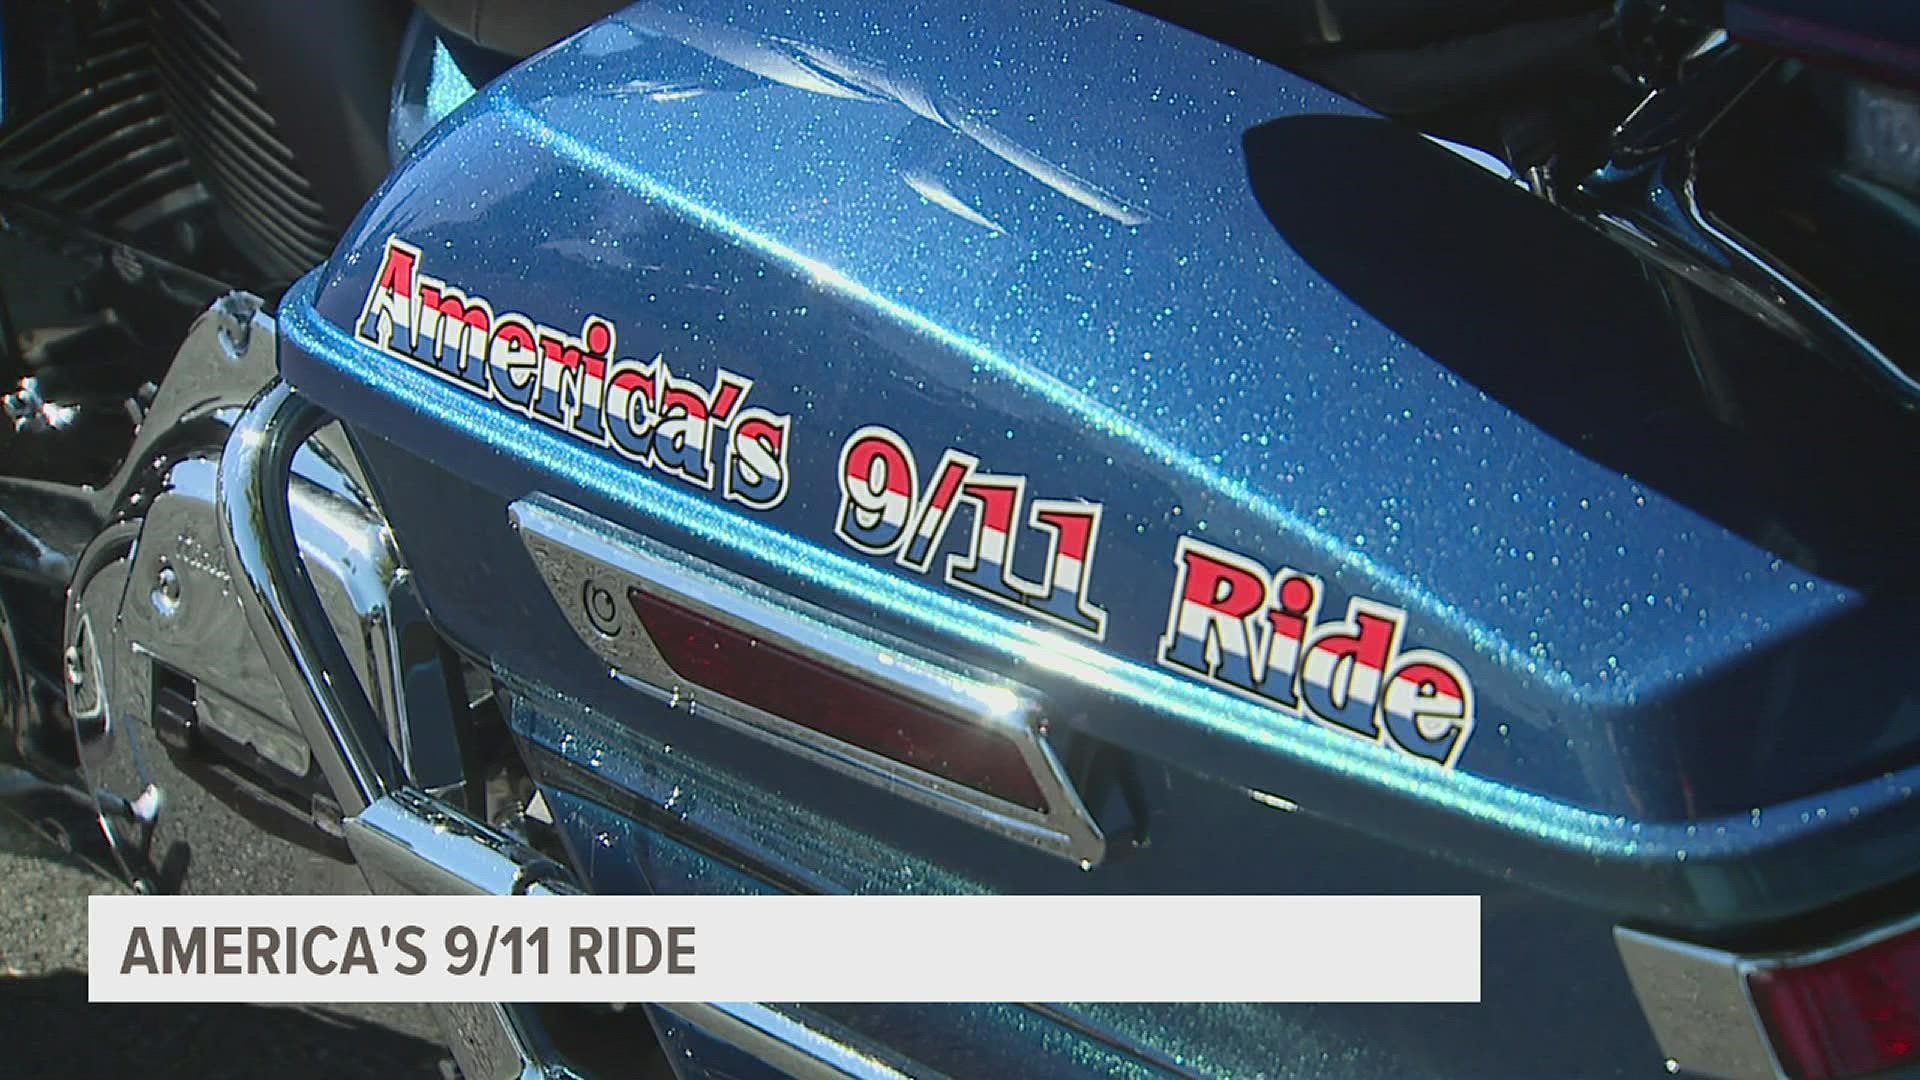 America's 9/11 Ride is a motorcycle ride and fundraiser where participants ride through Shanksville, Pa., the Pentagon, and finish at the World Trade Center.